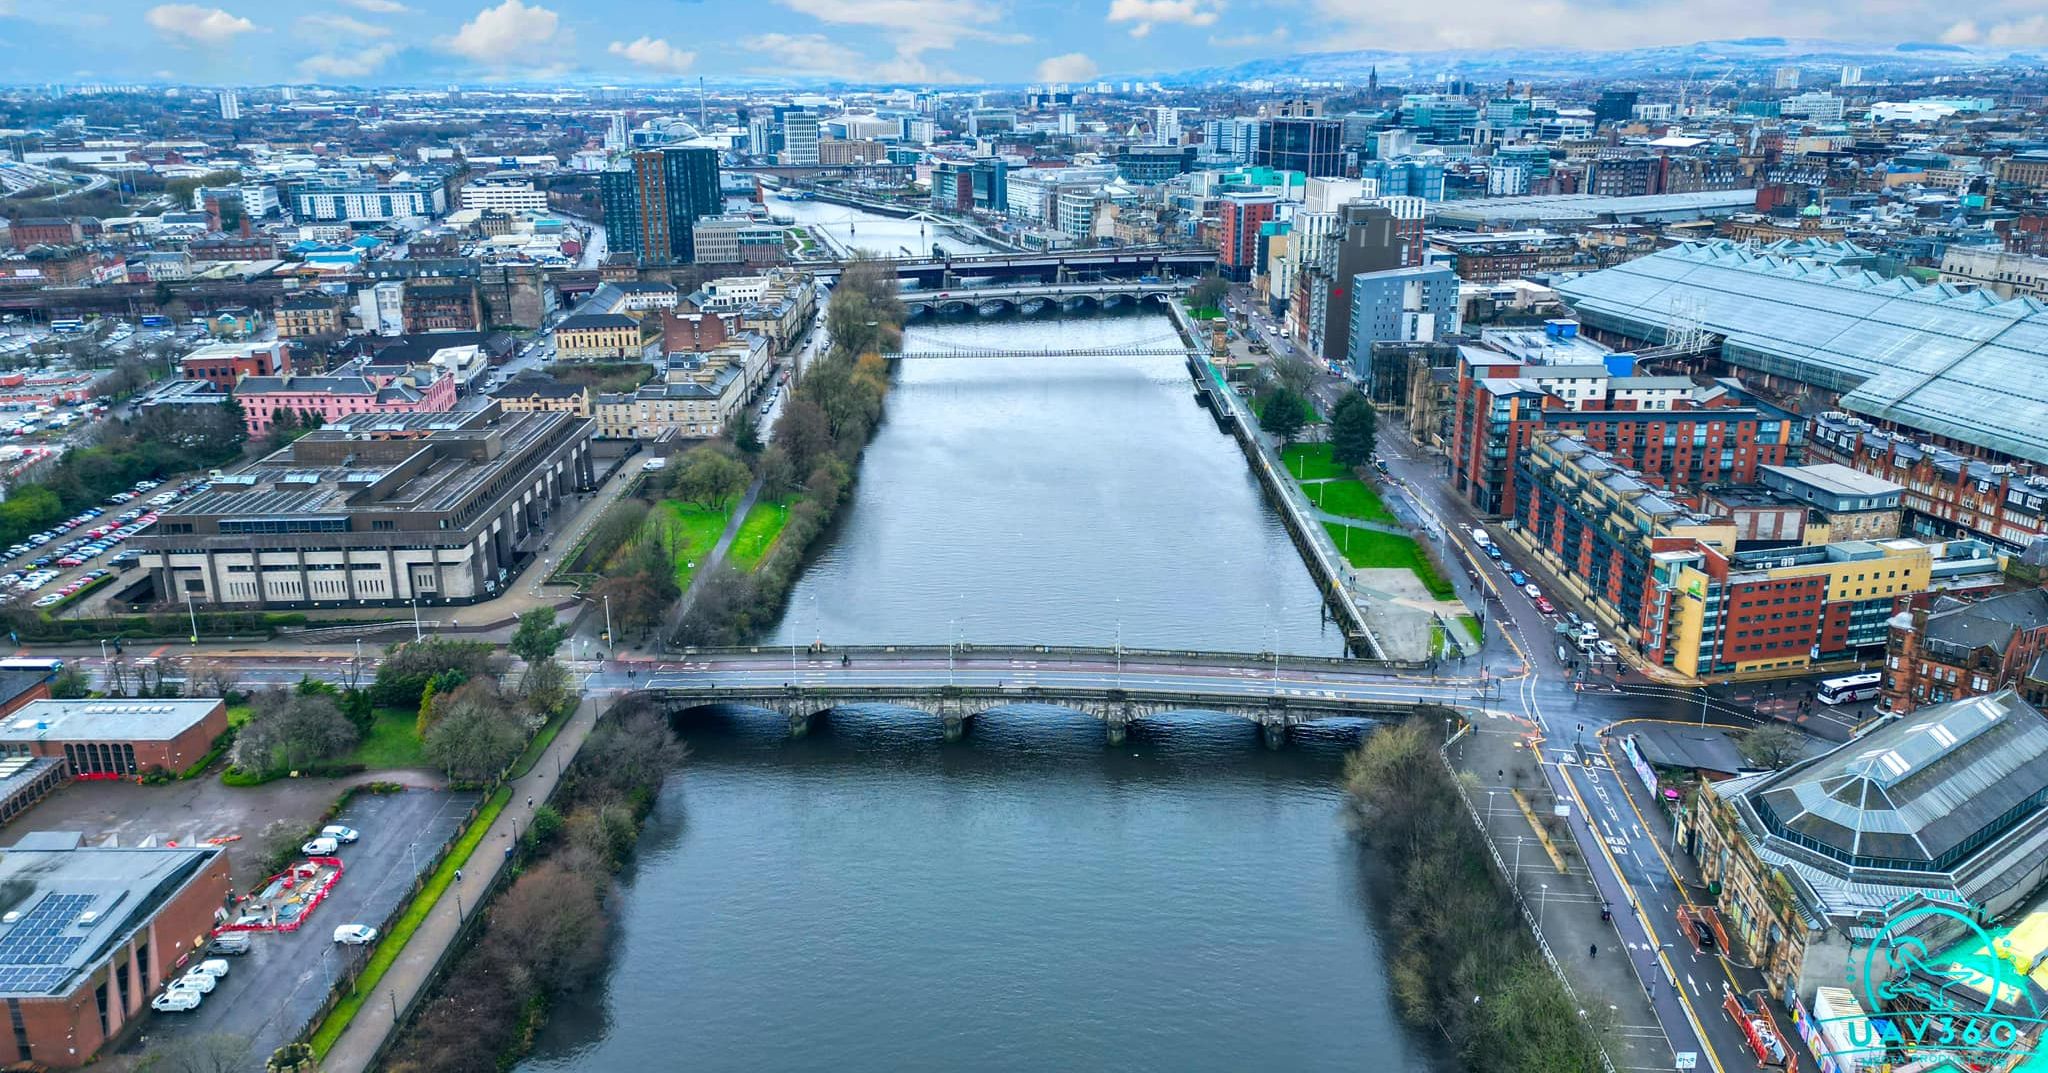 Bridges over the River Clyde in Glasgow, Scotland